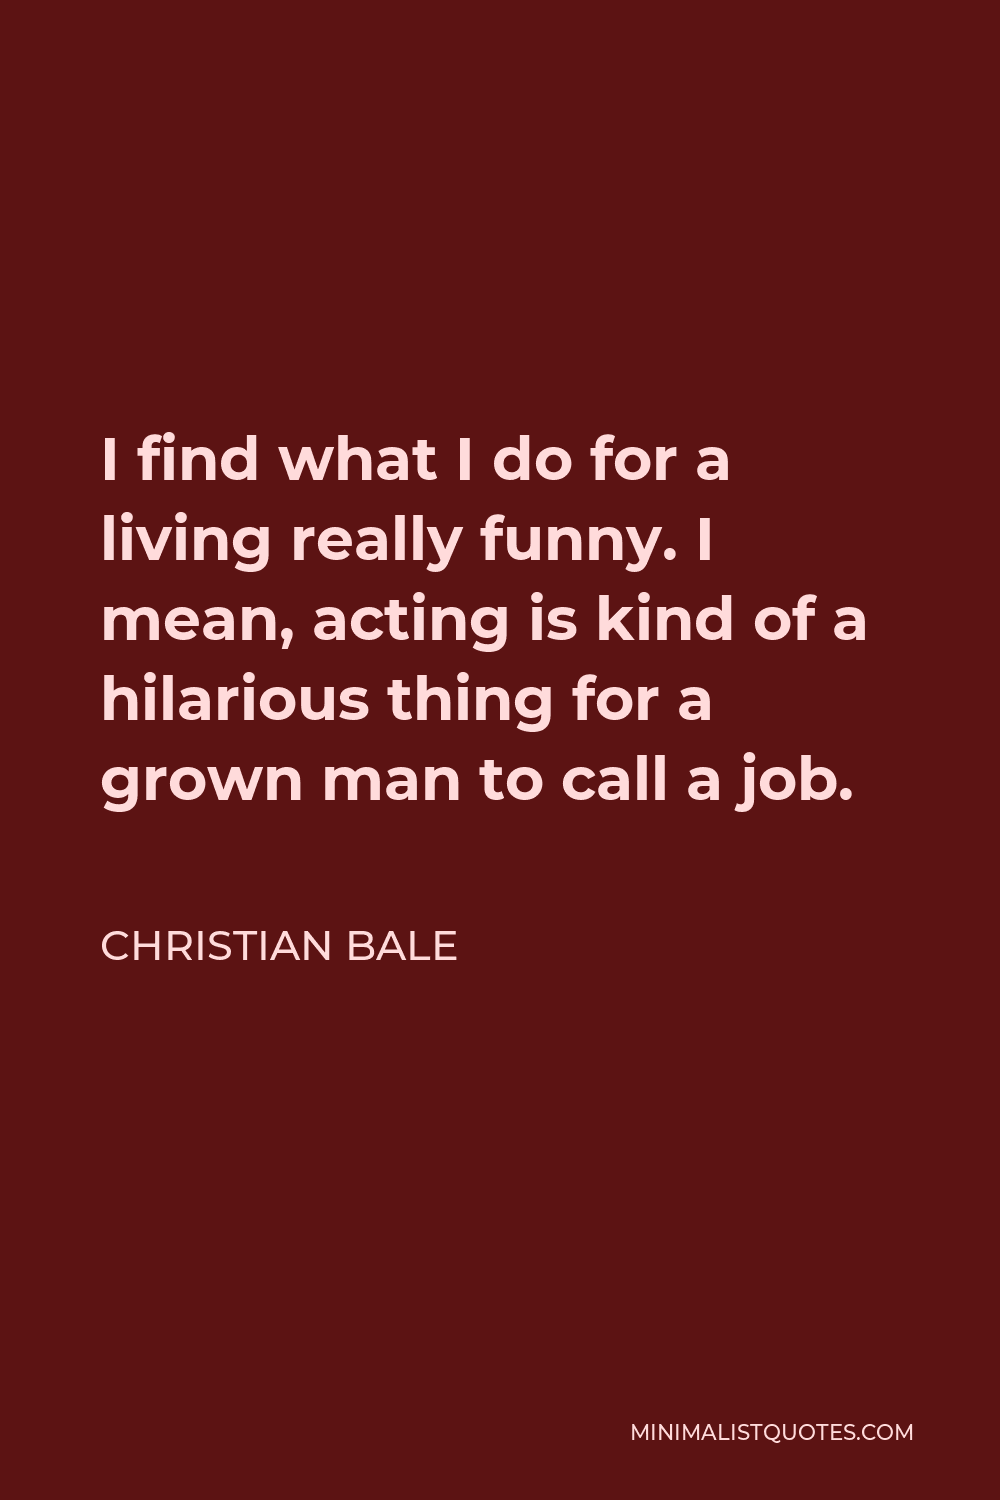 Christian Bale Quote - I find what I do for a living really funny. I mean, acting is kind of a hilarious thing for a grown man to call a job.